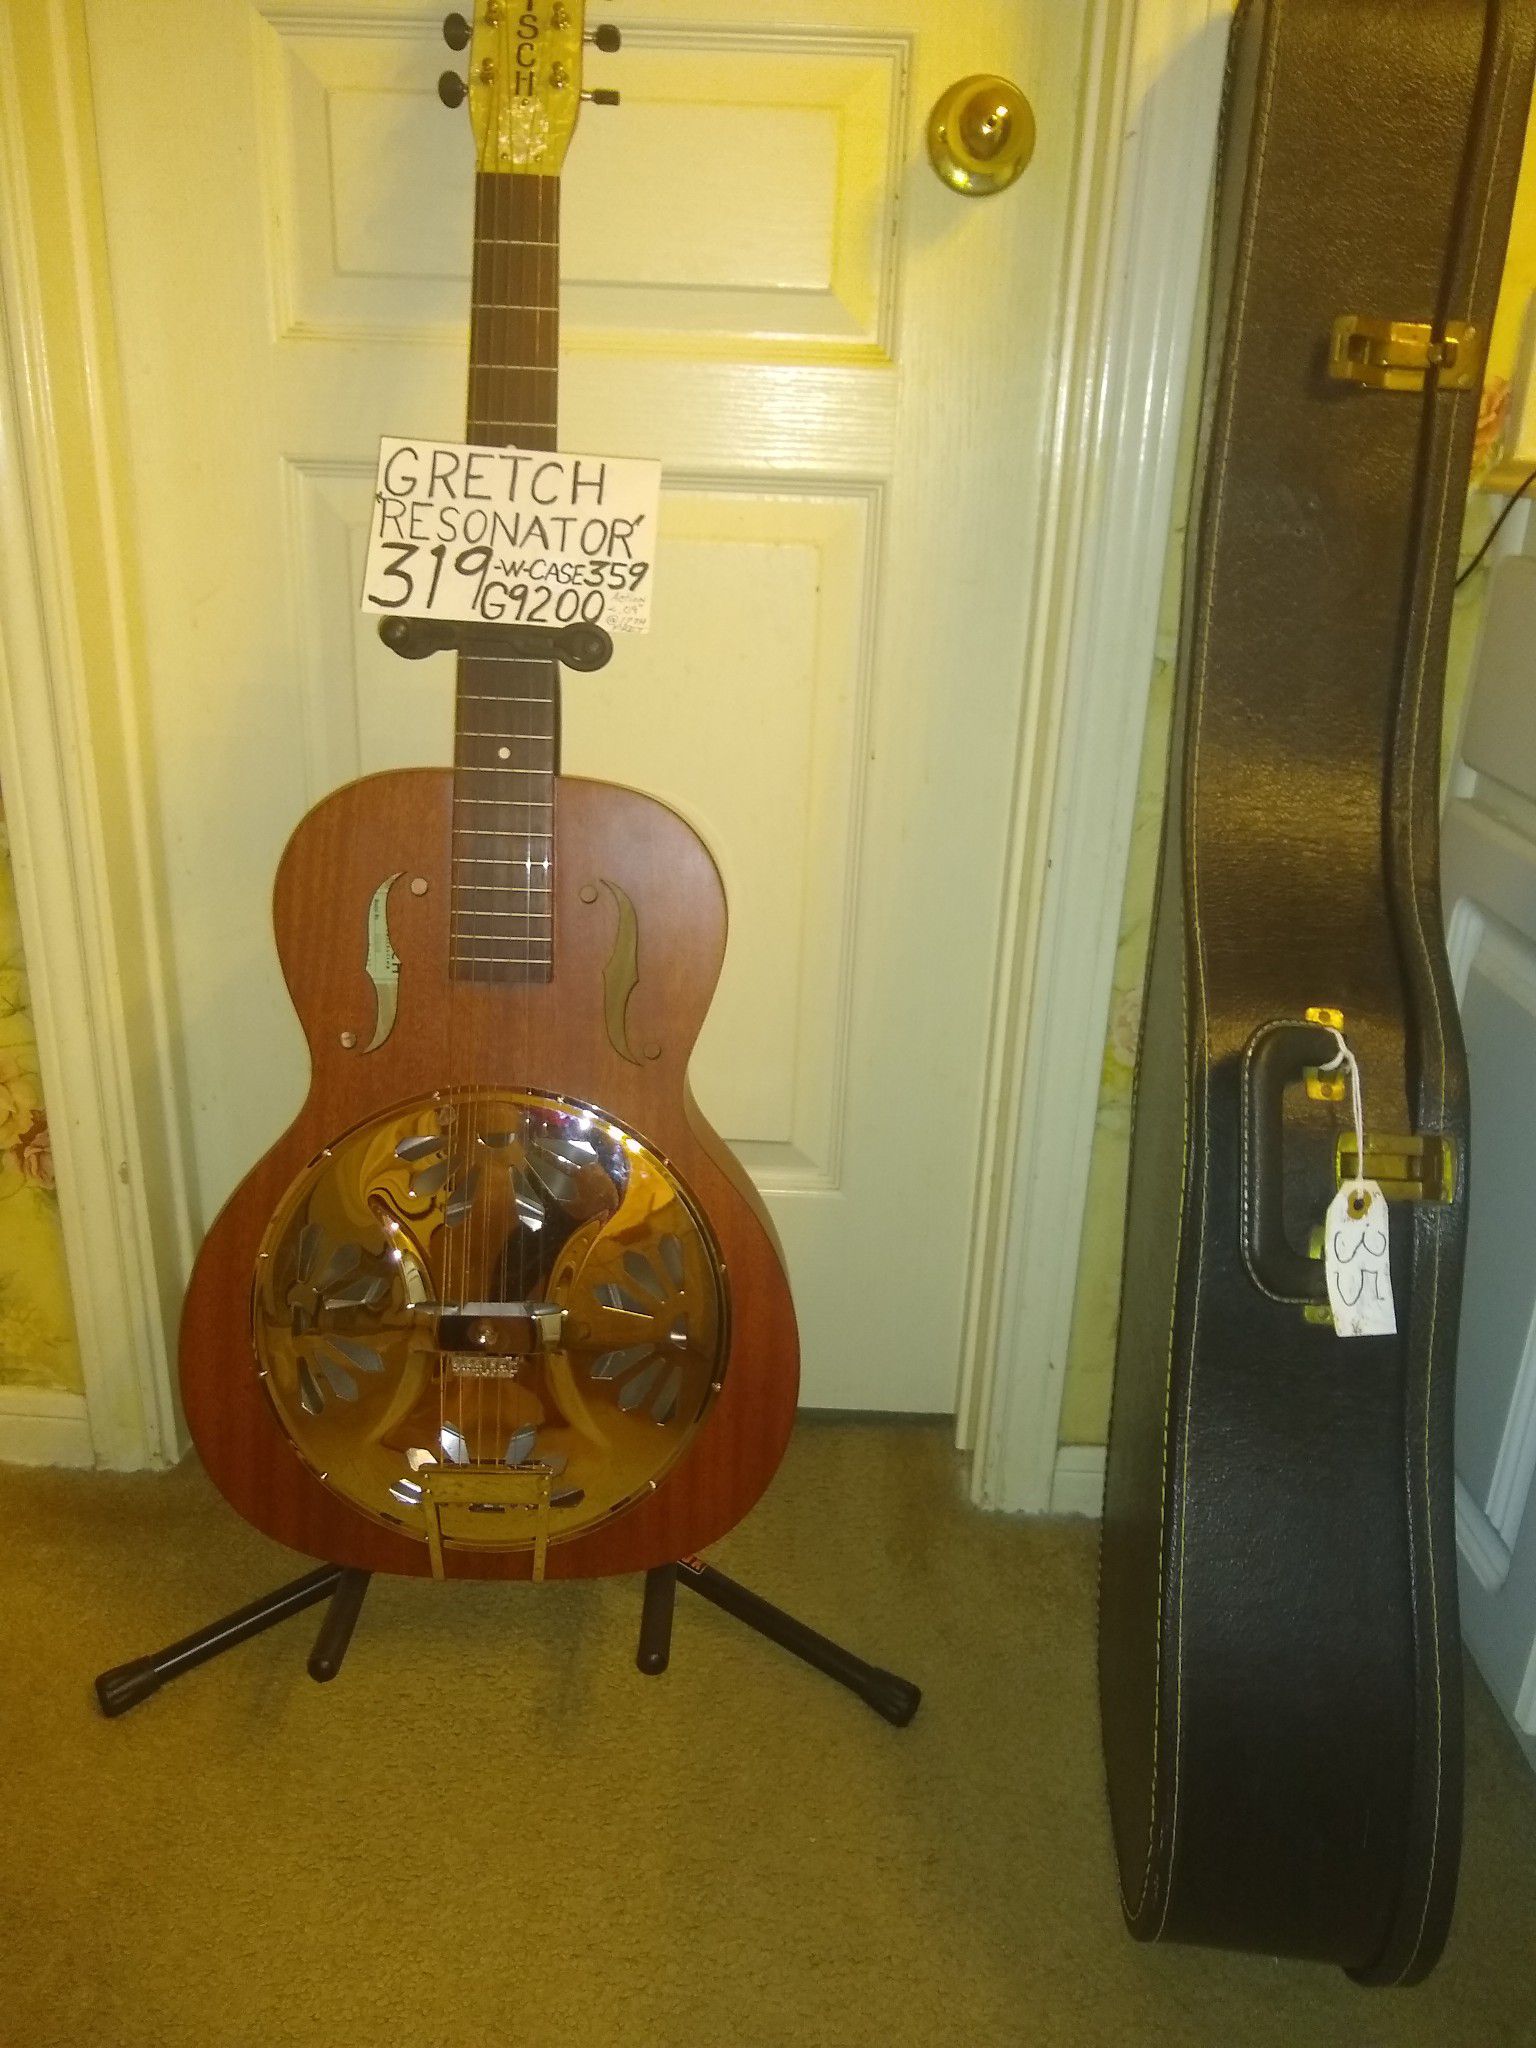 Gretsch Resonator Acoustic Guitar in solid mahogany perfect showroom condition with case!